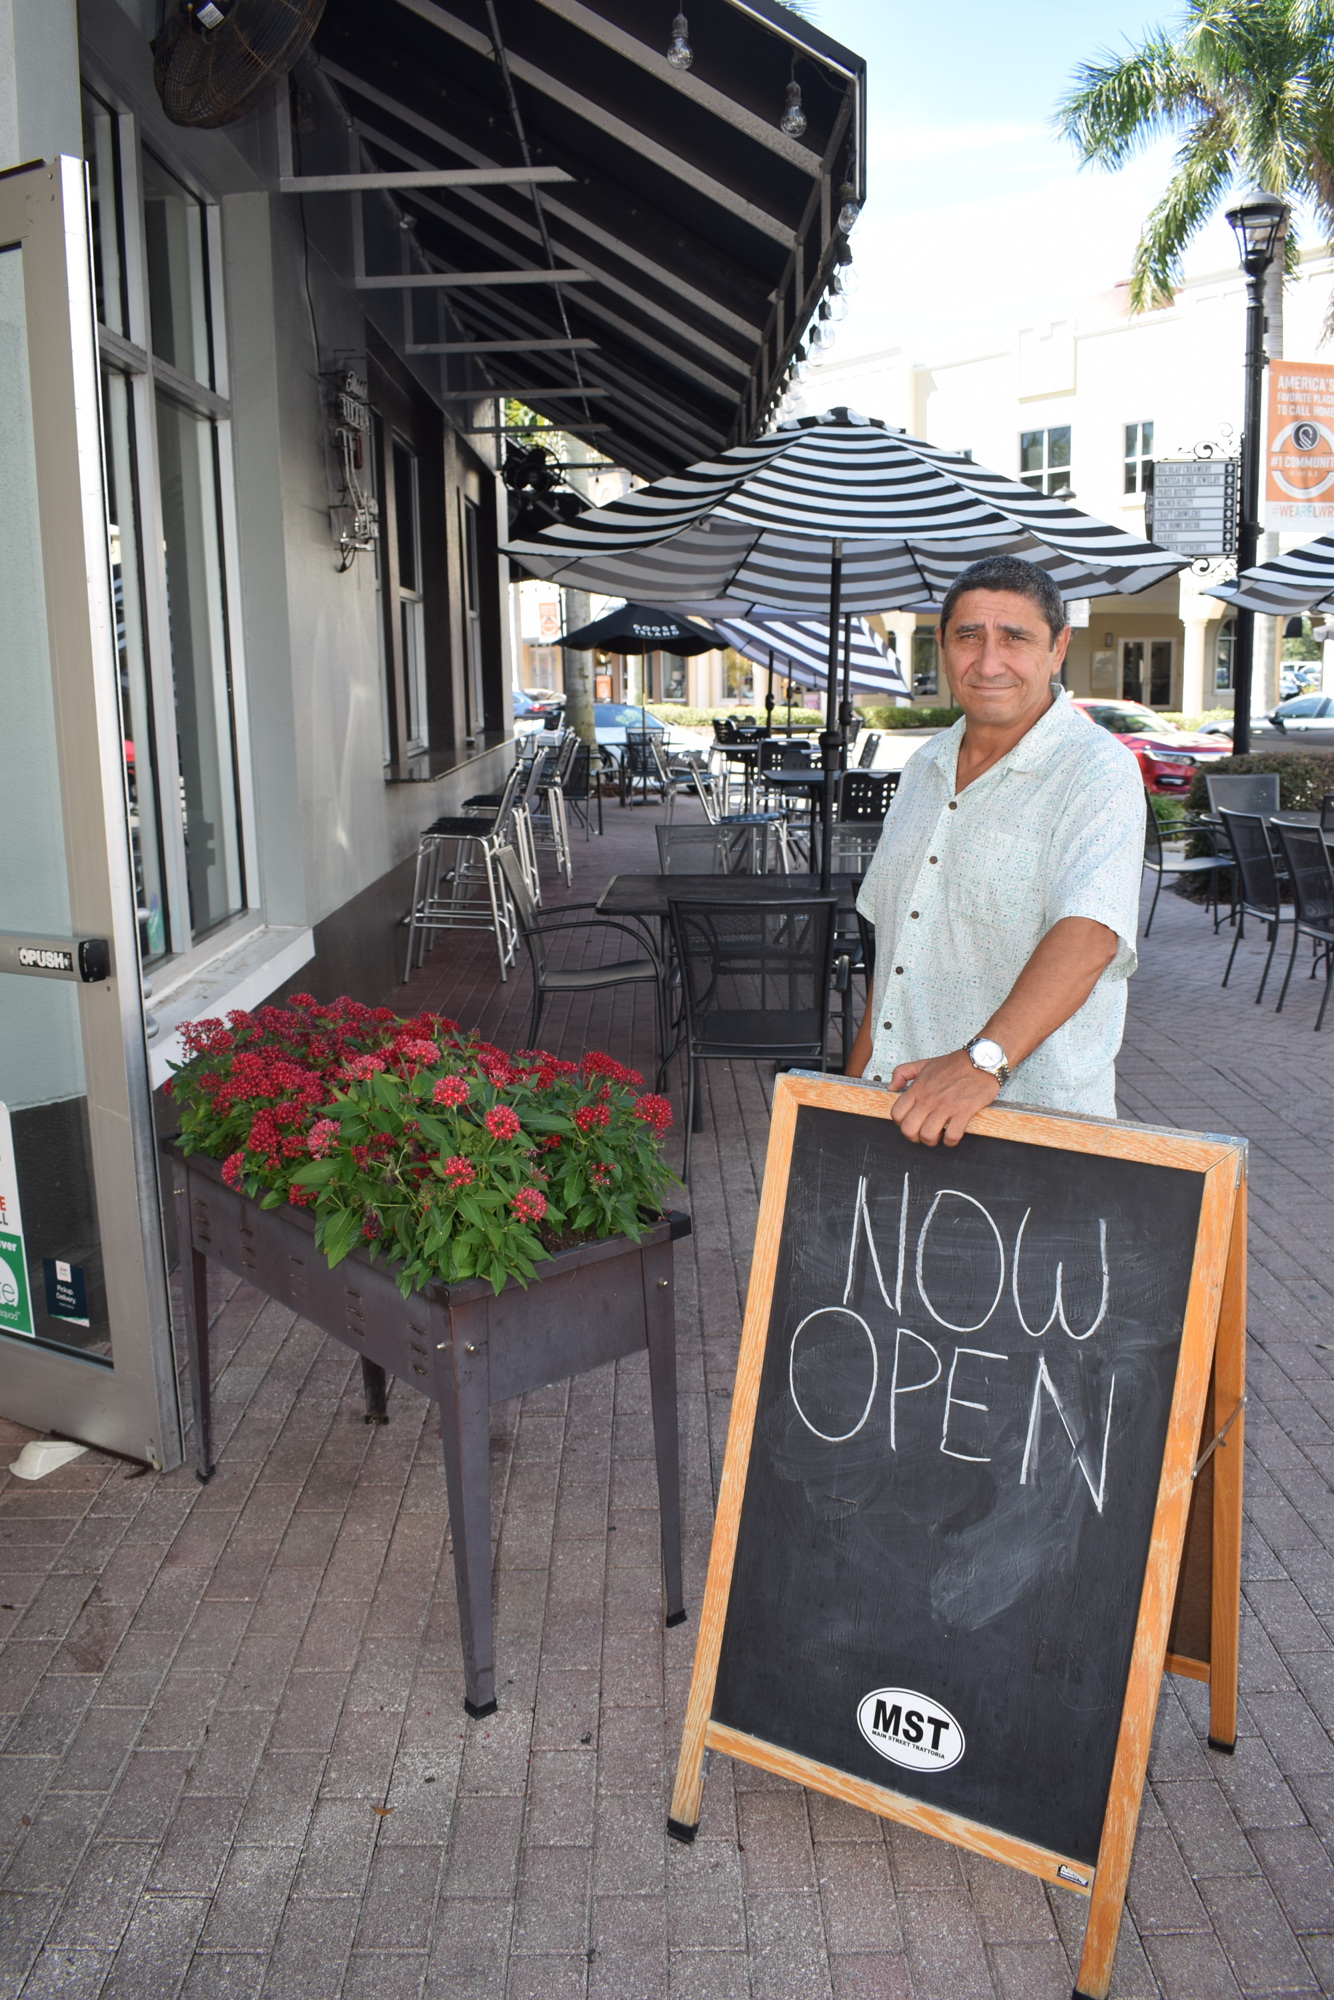 Sergio Di Sarro rushed to open his restaurant after former owner Gary Fennessy closed it Sept. 12 because he didn't want the employees to be out of work.